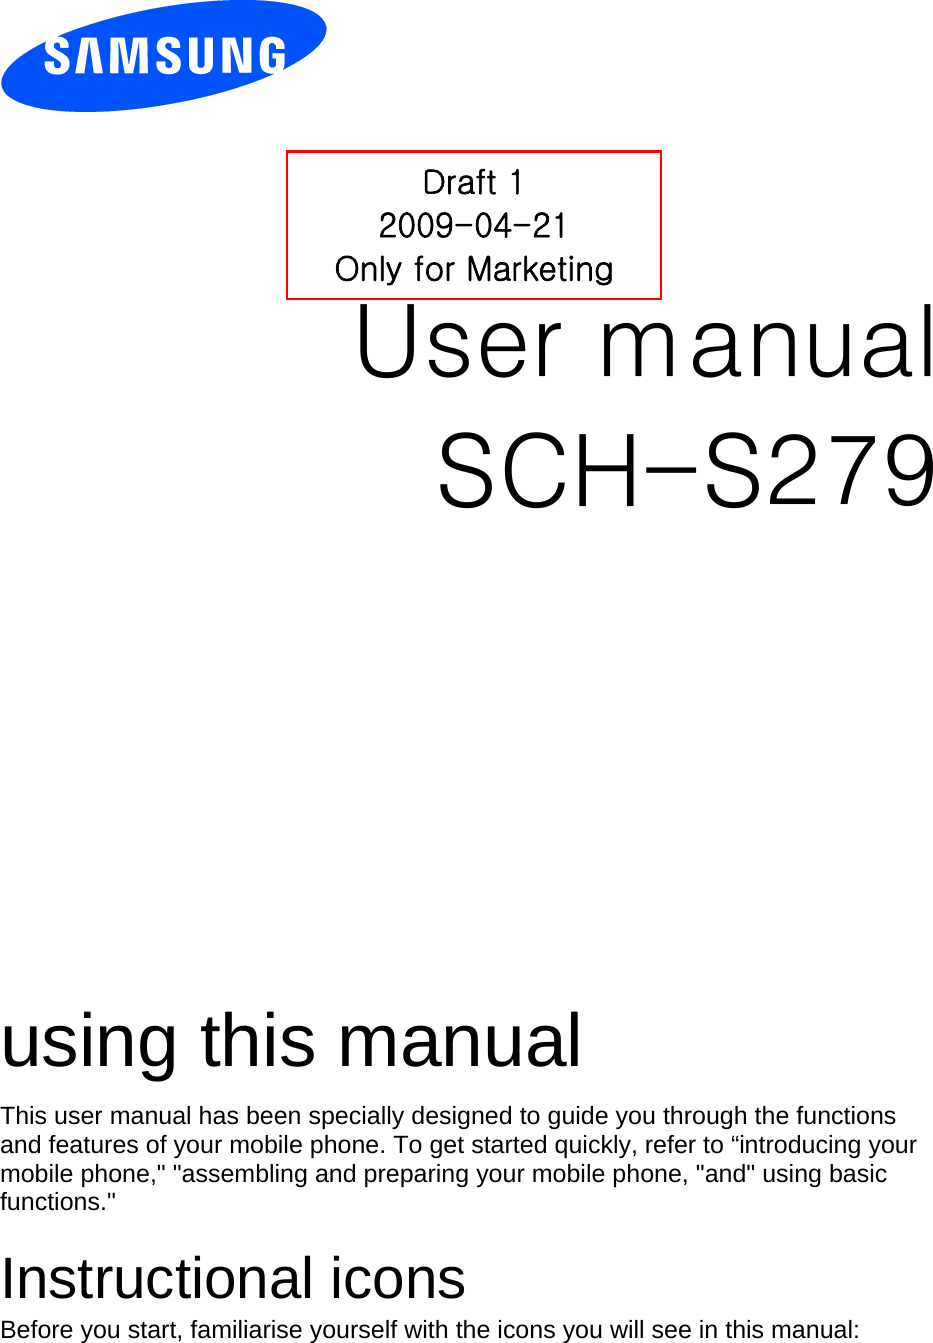          User manual Draft 1 2009-04-21 Only for Marketing SCH-S279                  using this manual This user manual has been specially designed to guide you through the functions and features of your mobile phone. To get started quickly, refer to “introducing your mobile phone,&quot; &quot;assembling and preparing your mobile phone, &quot;and&quot; using basic functions.&quot;  Instructional icons Before you start, familiarise yourself with the icons you will see in this manual:   